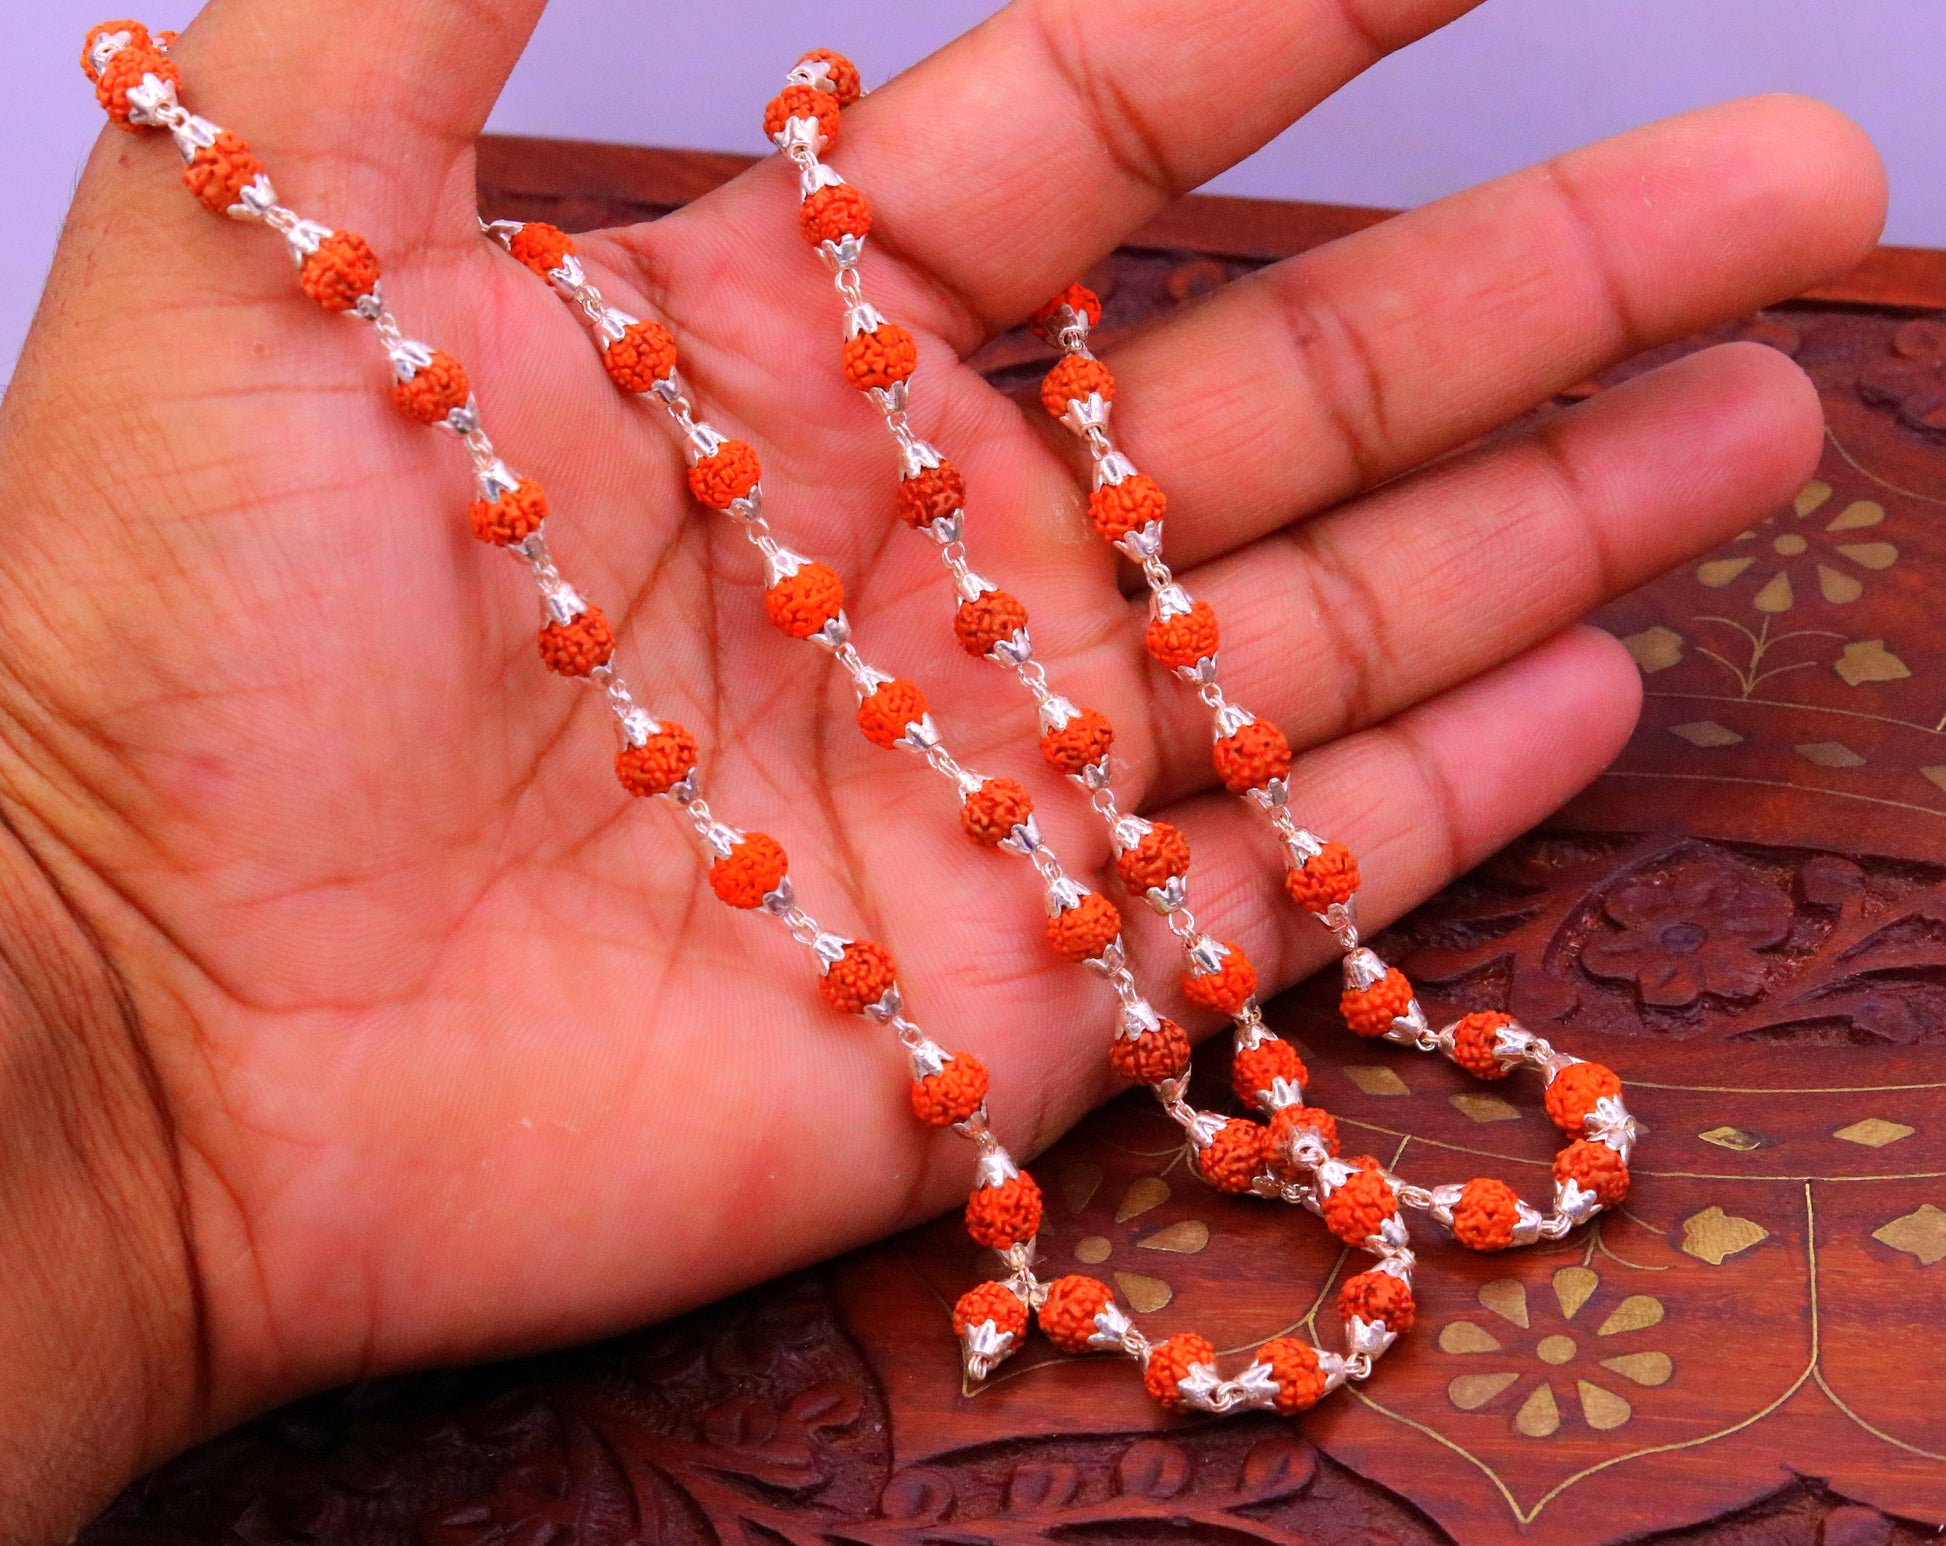 Natural rudraksha beads or seeds Sterling silver handmade 54+1 Rudraksha beads chain necklace jappmala excellent gifting unisex jewelry ch60 - TRIBAL ORNAMENTS